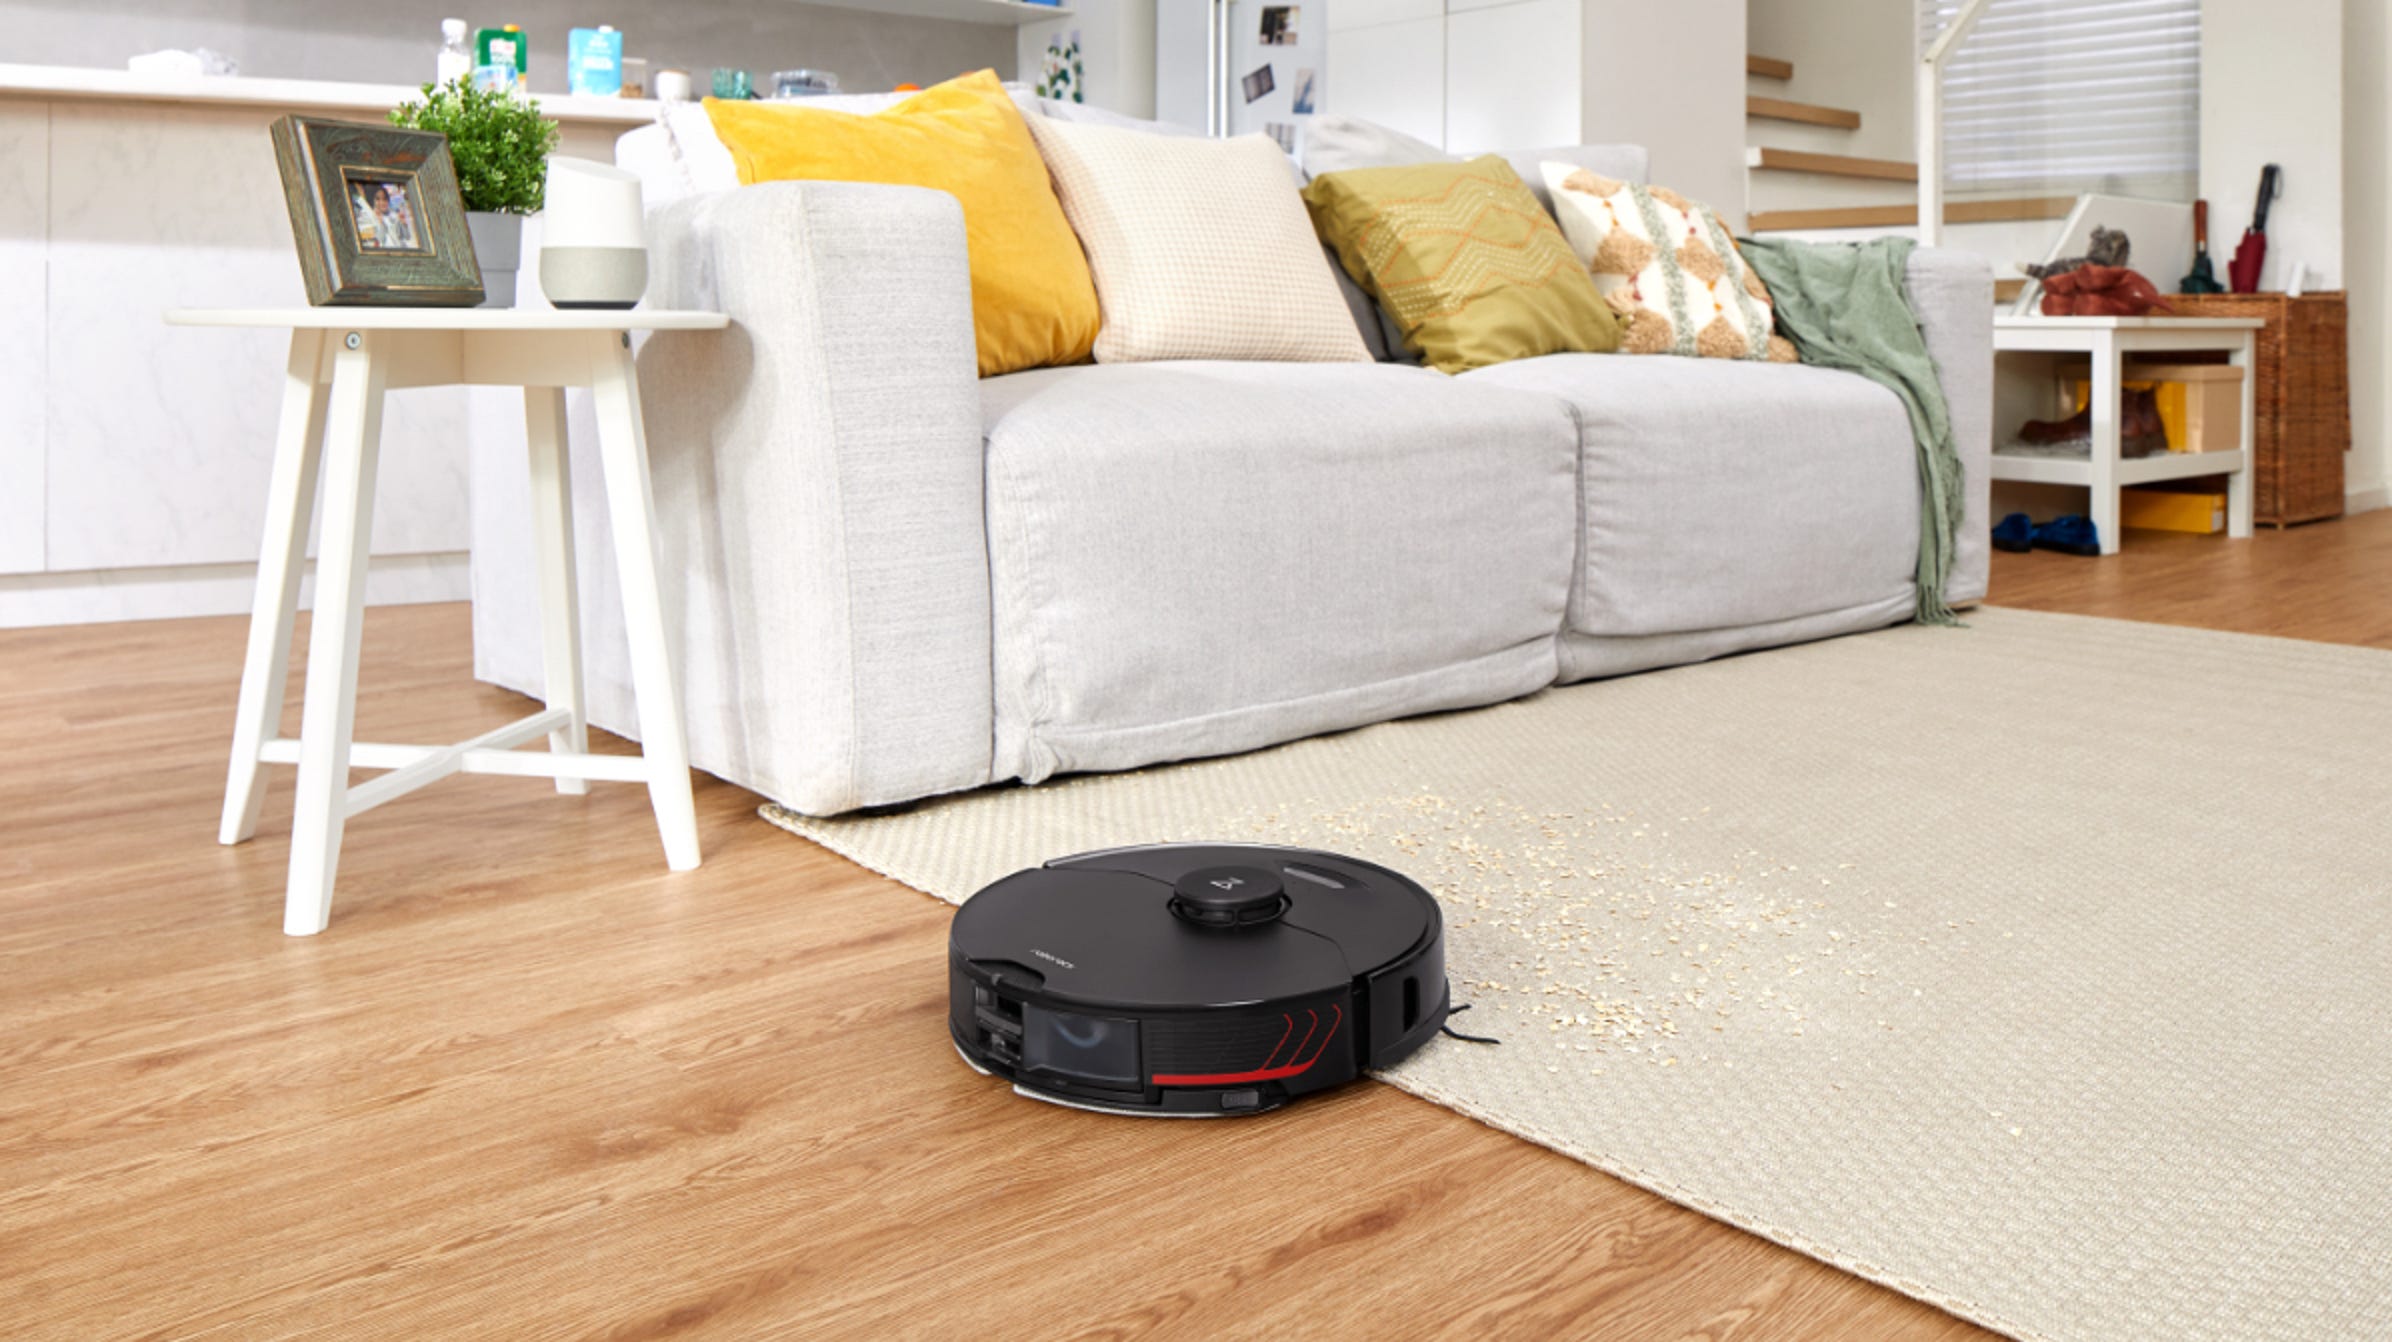 Our New Favorite Robot Vacuum Goes on Sale Today [SPONSORED]